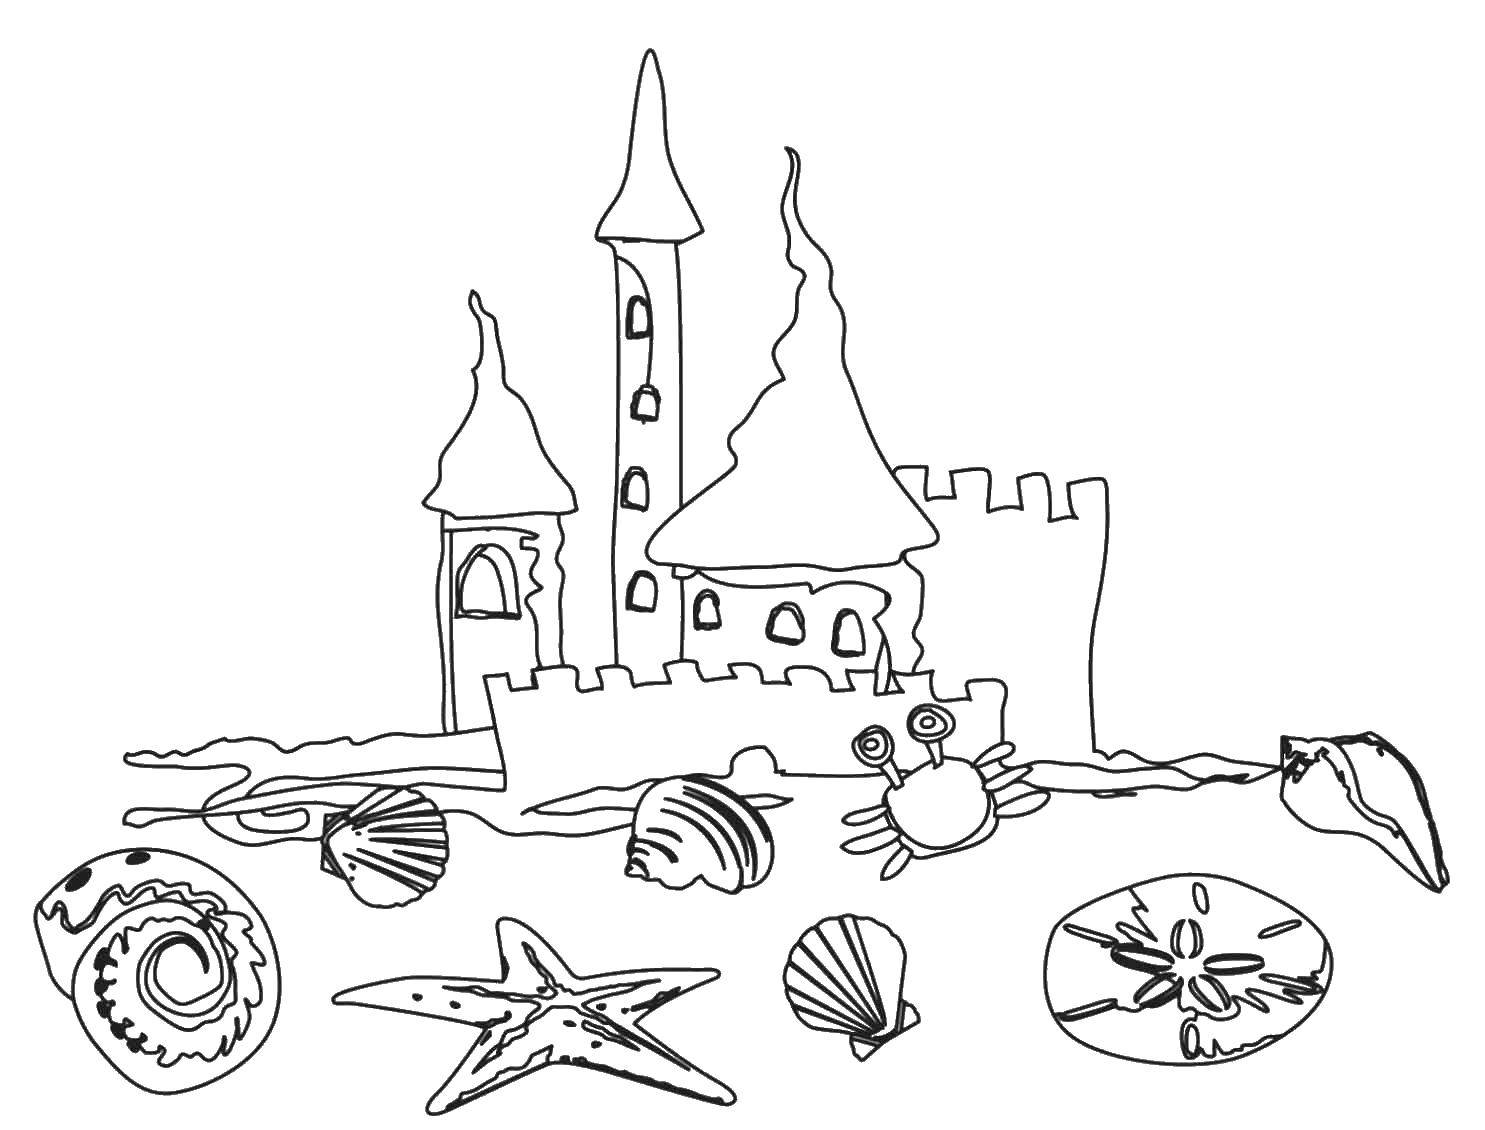 Coloring Castle on the beach. Category Summer fun. Tags:  beach, sea, sand, crab.